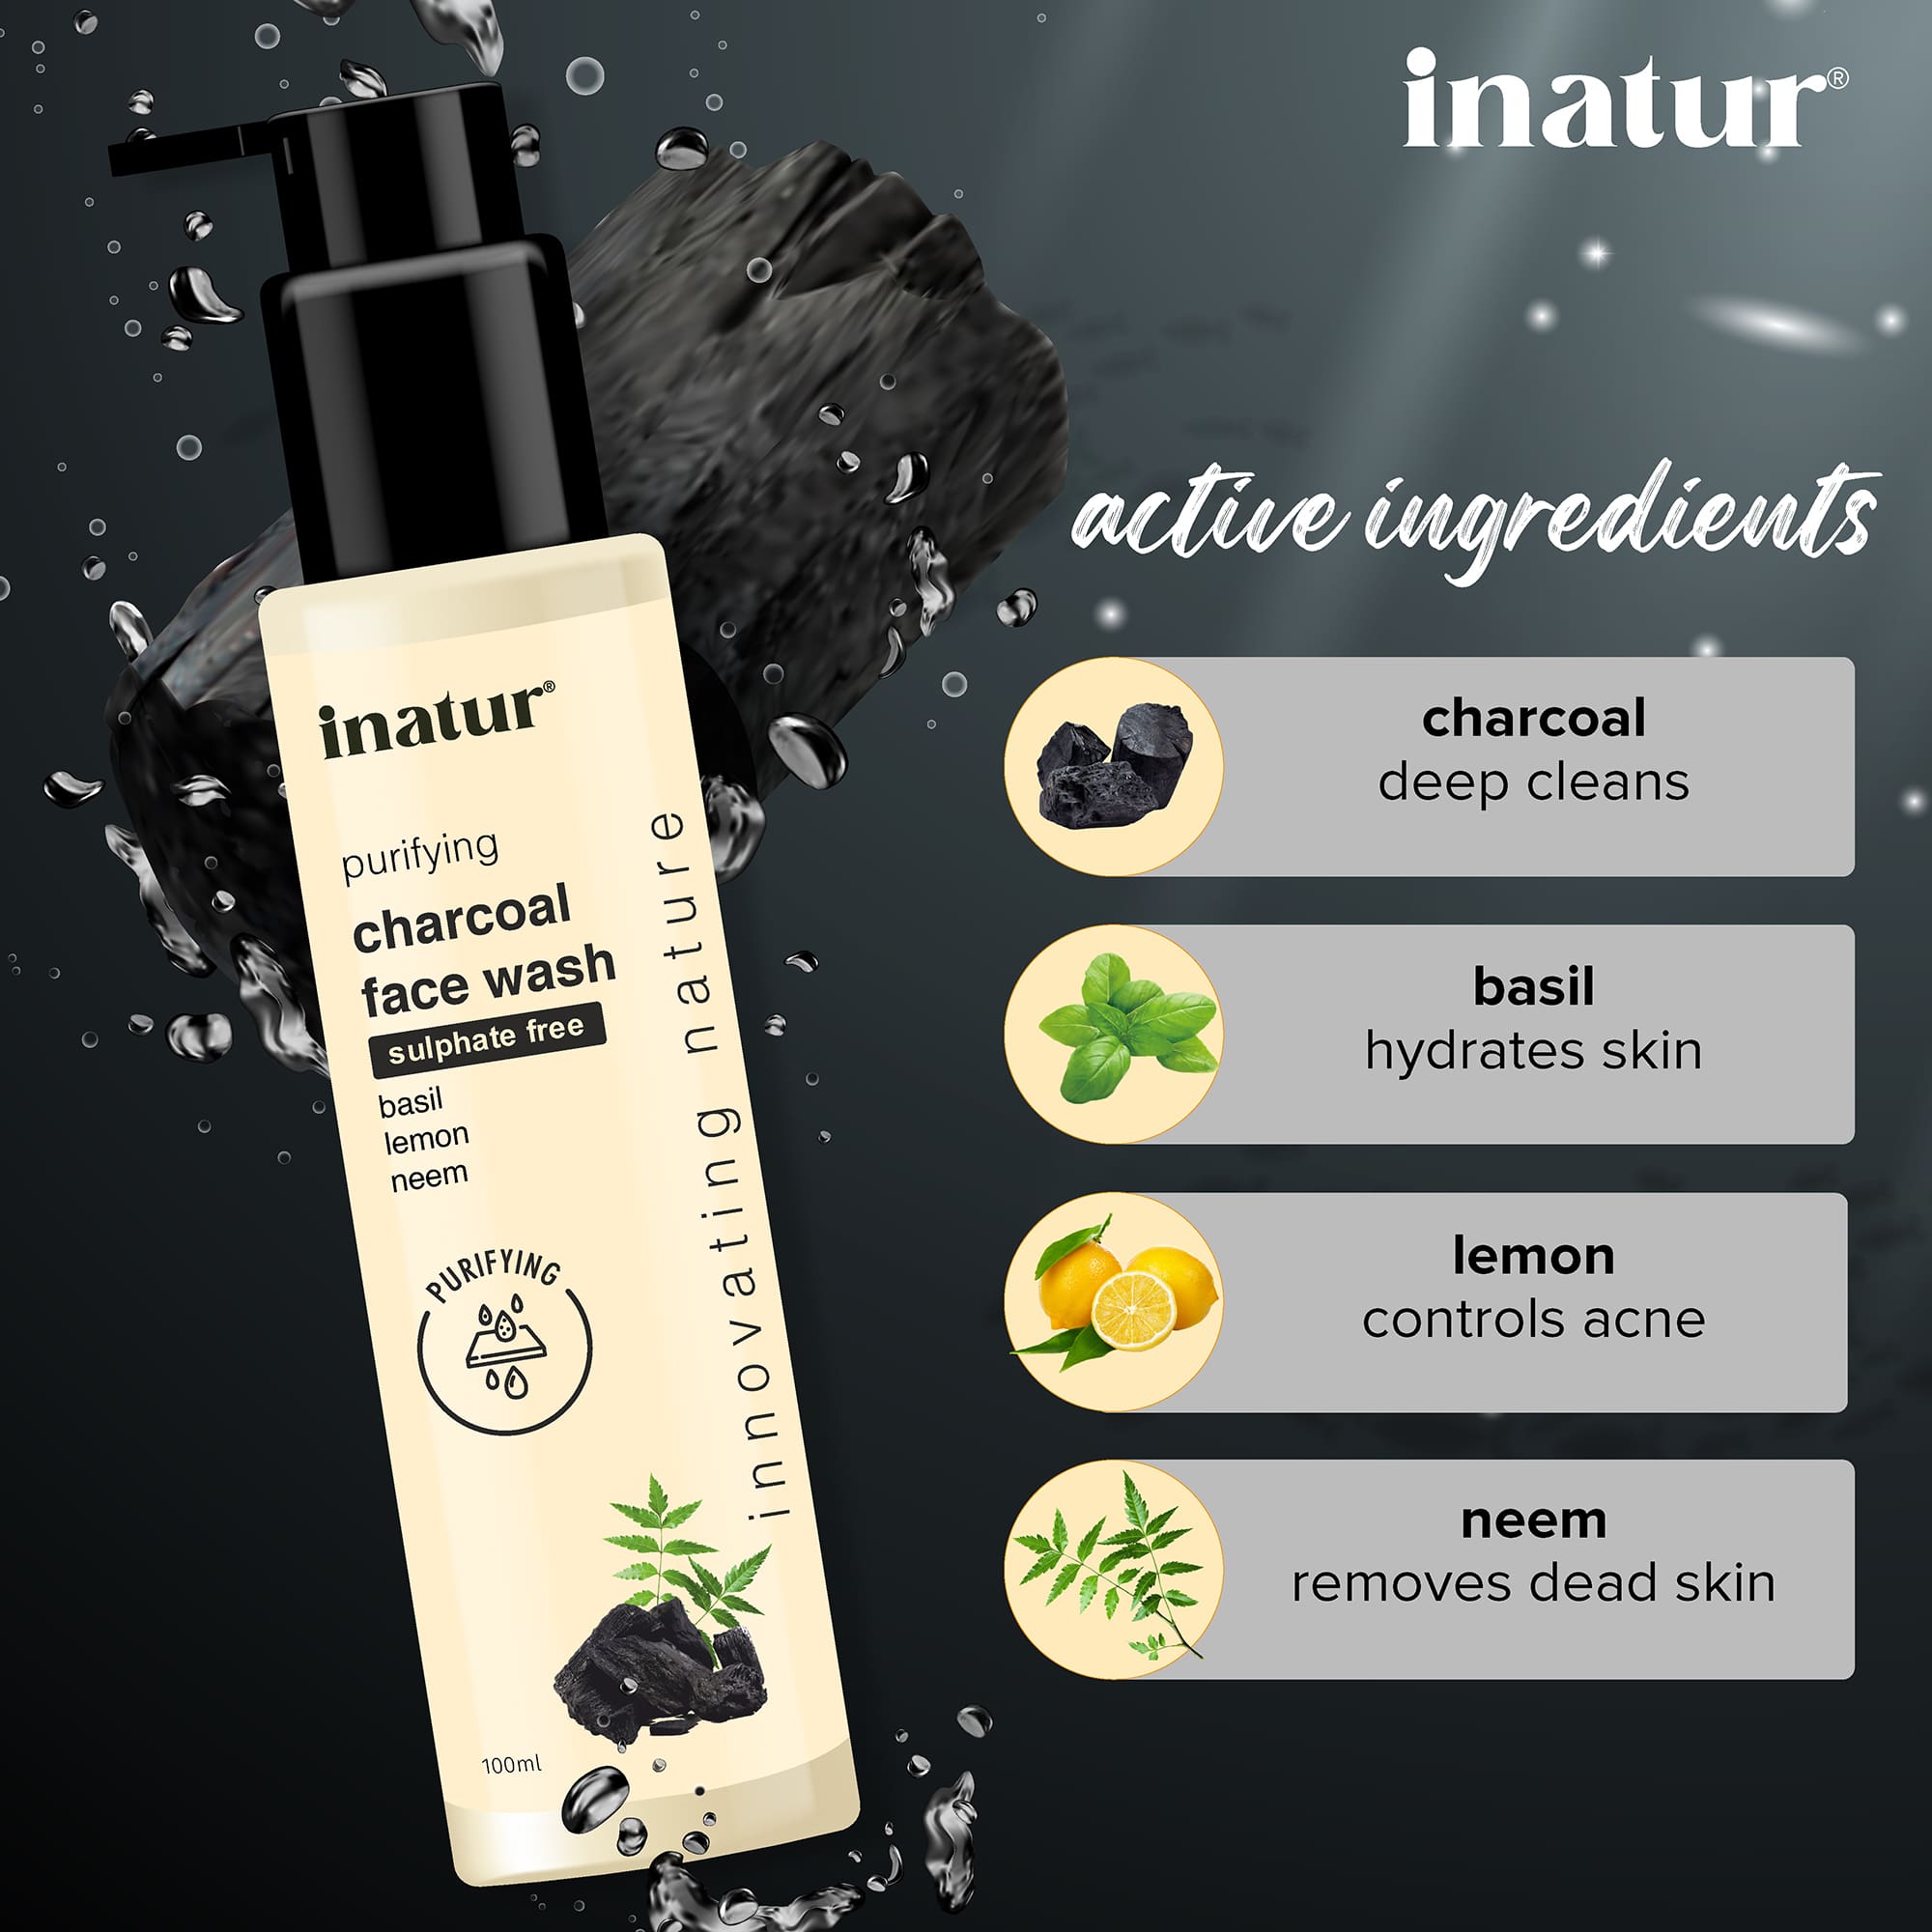 ingredients inatur charcoal face wash 100ml